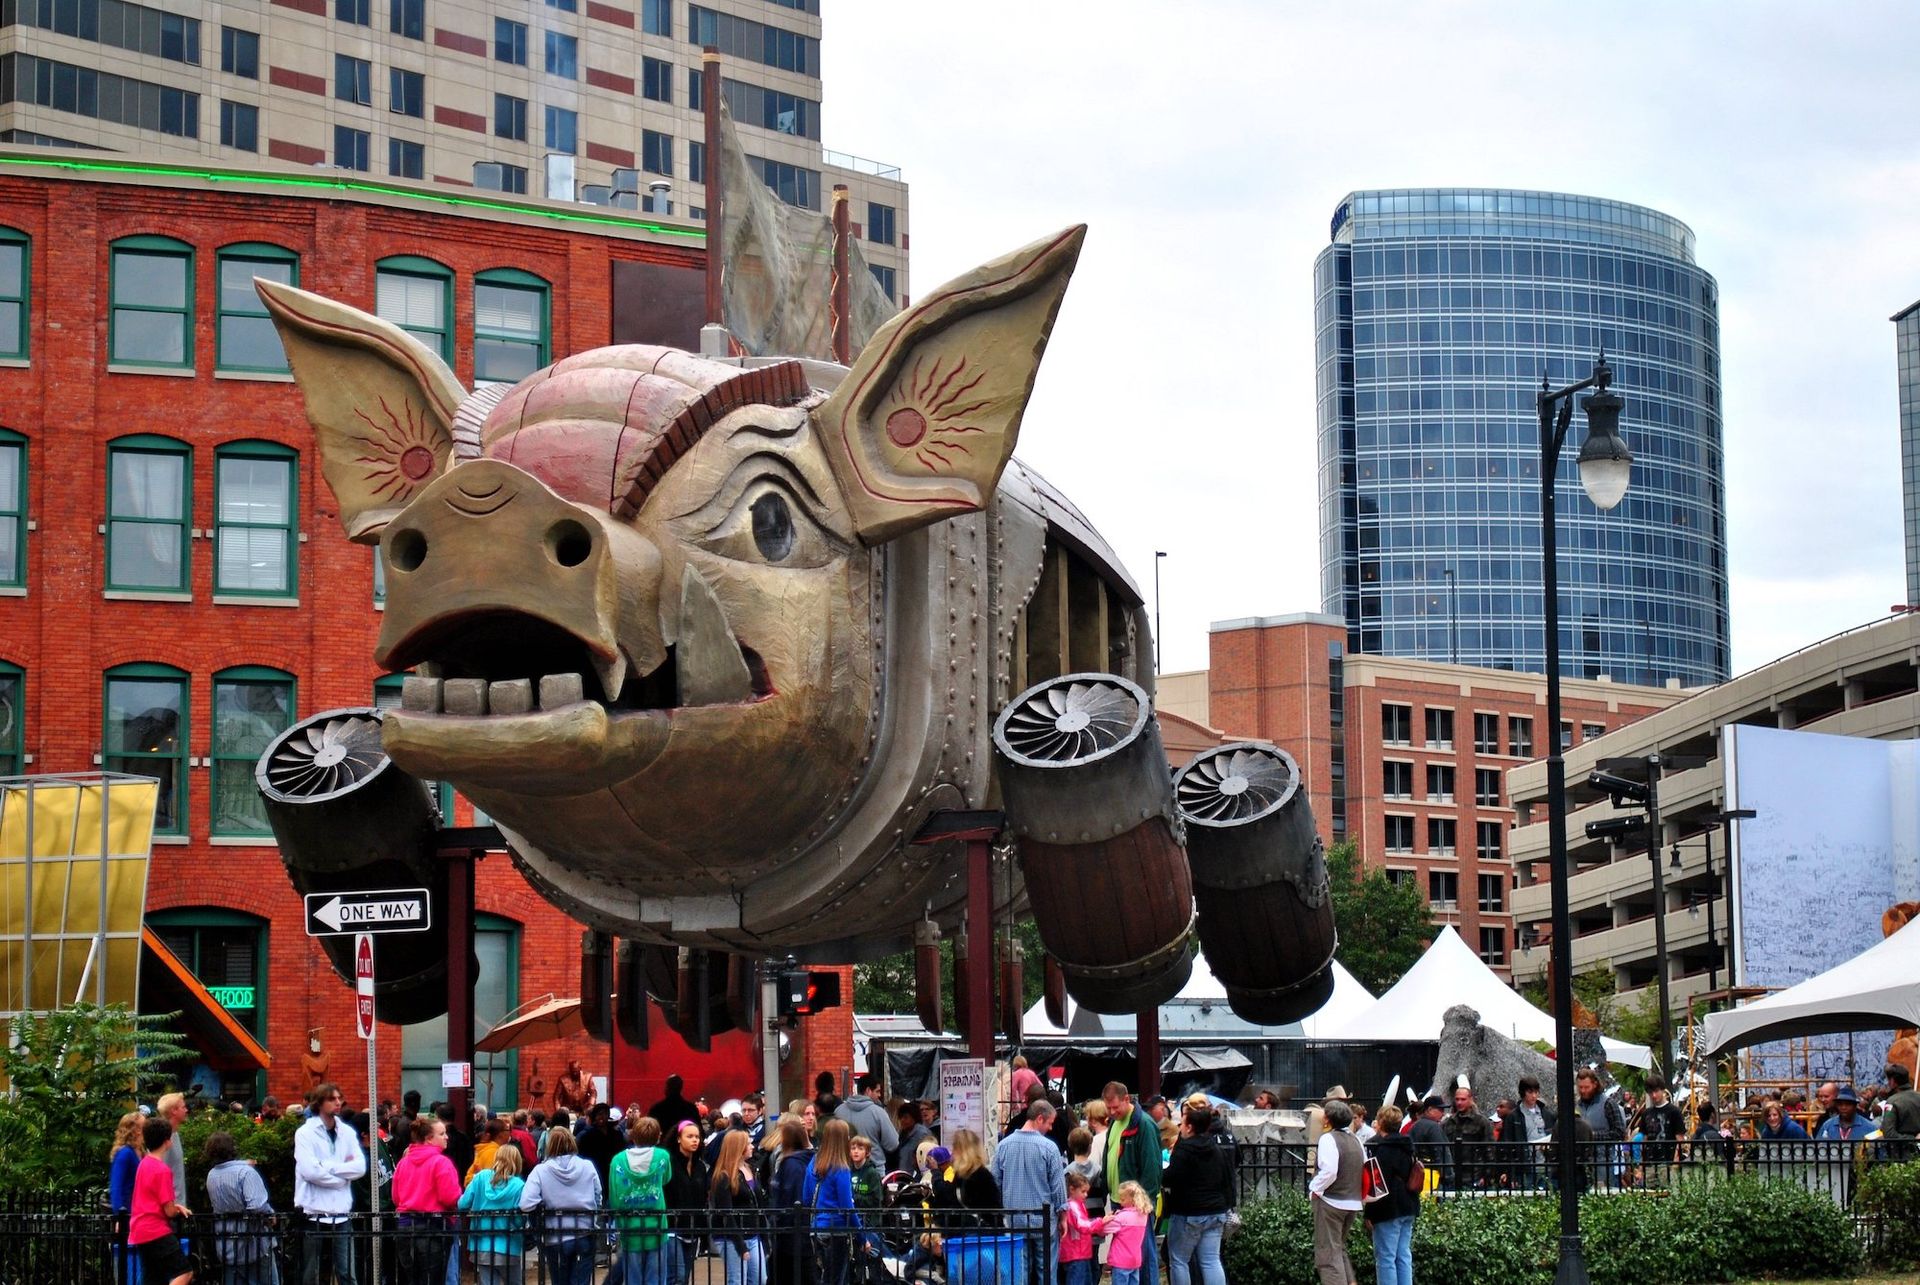 The ninth-place entry in ArtPrize 2010, Parsifal the SteamPig (2010), by Thomas Birks, Joachim Jensen and Michael Knoll Photo by David Guthrie, via Flickr